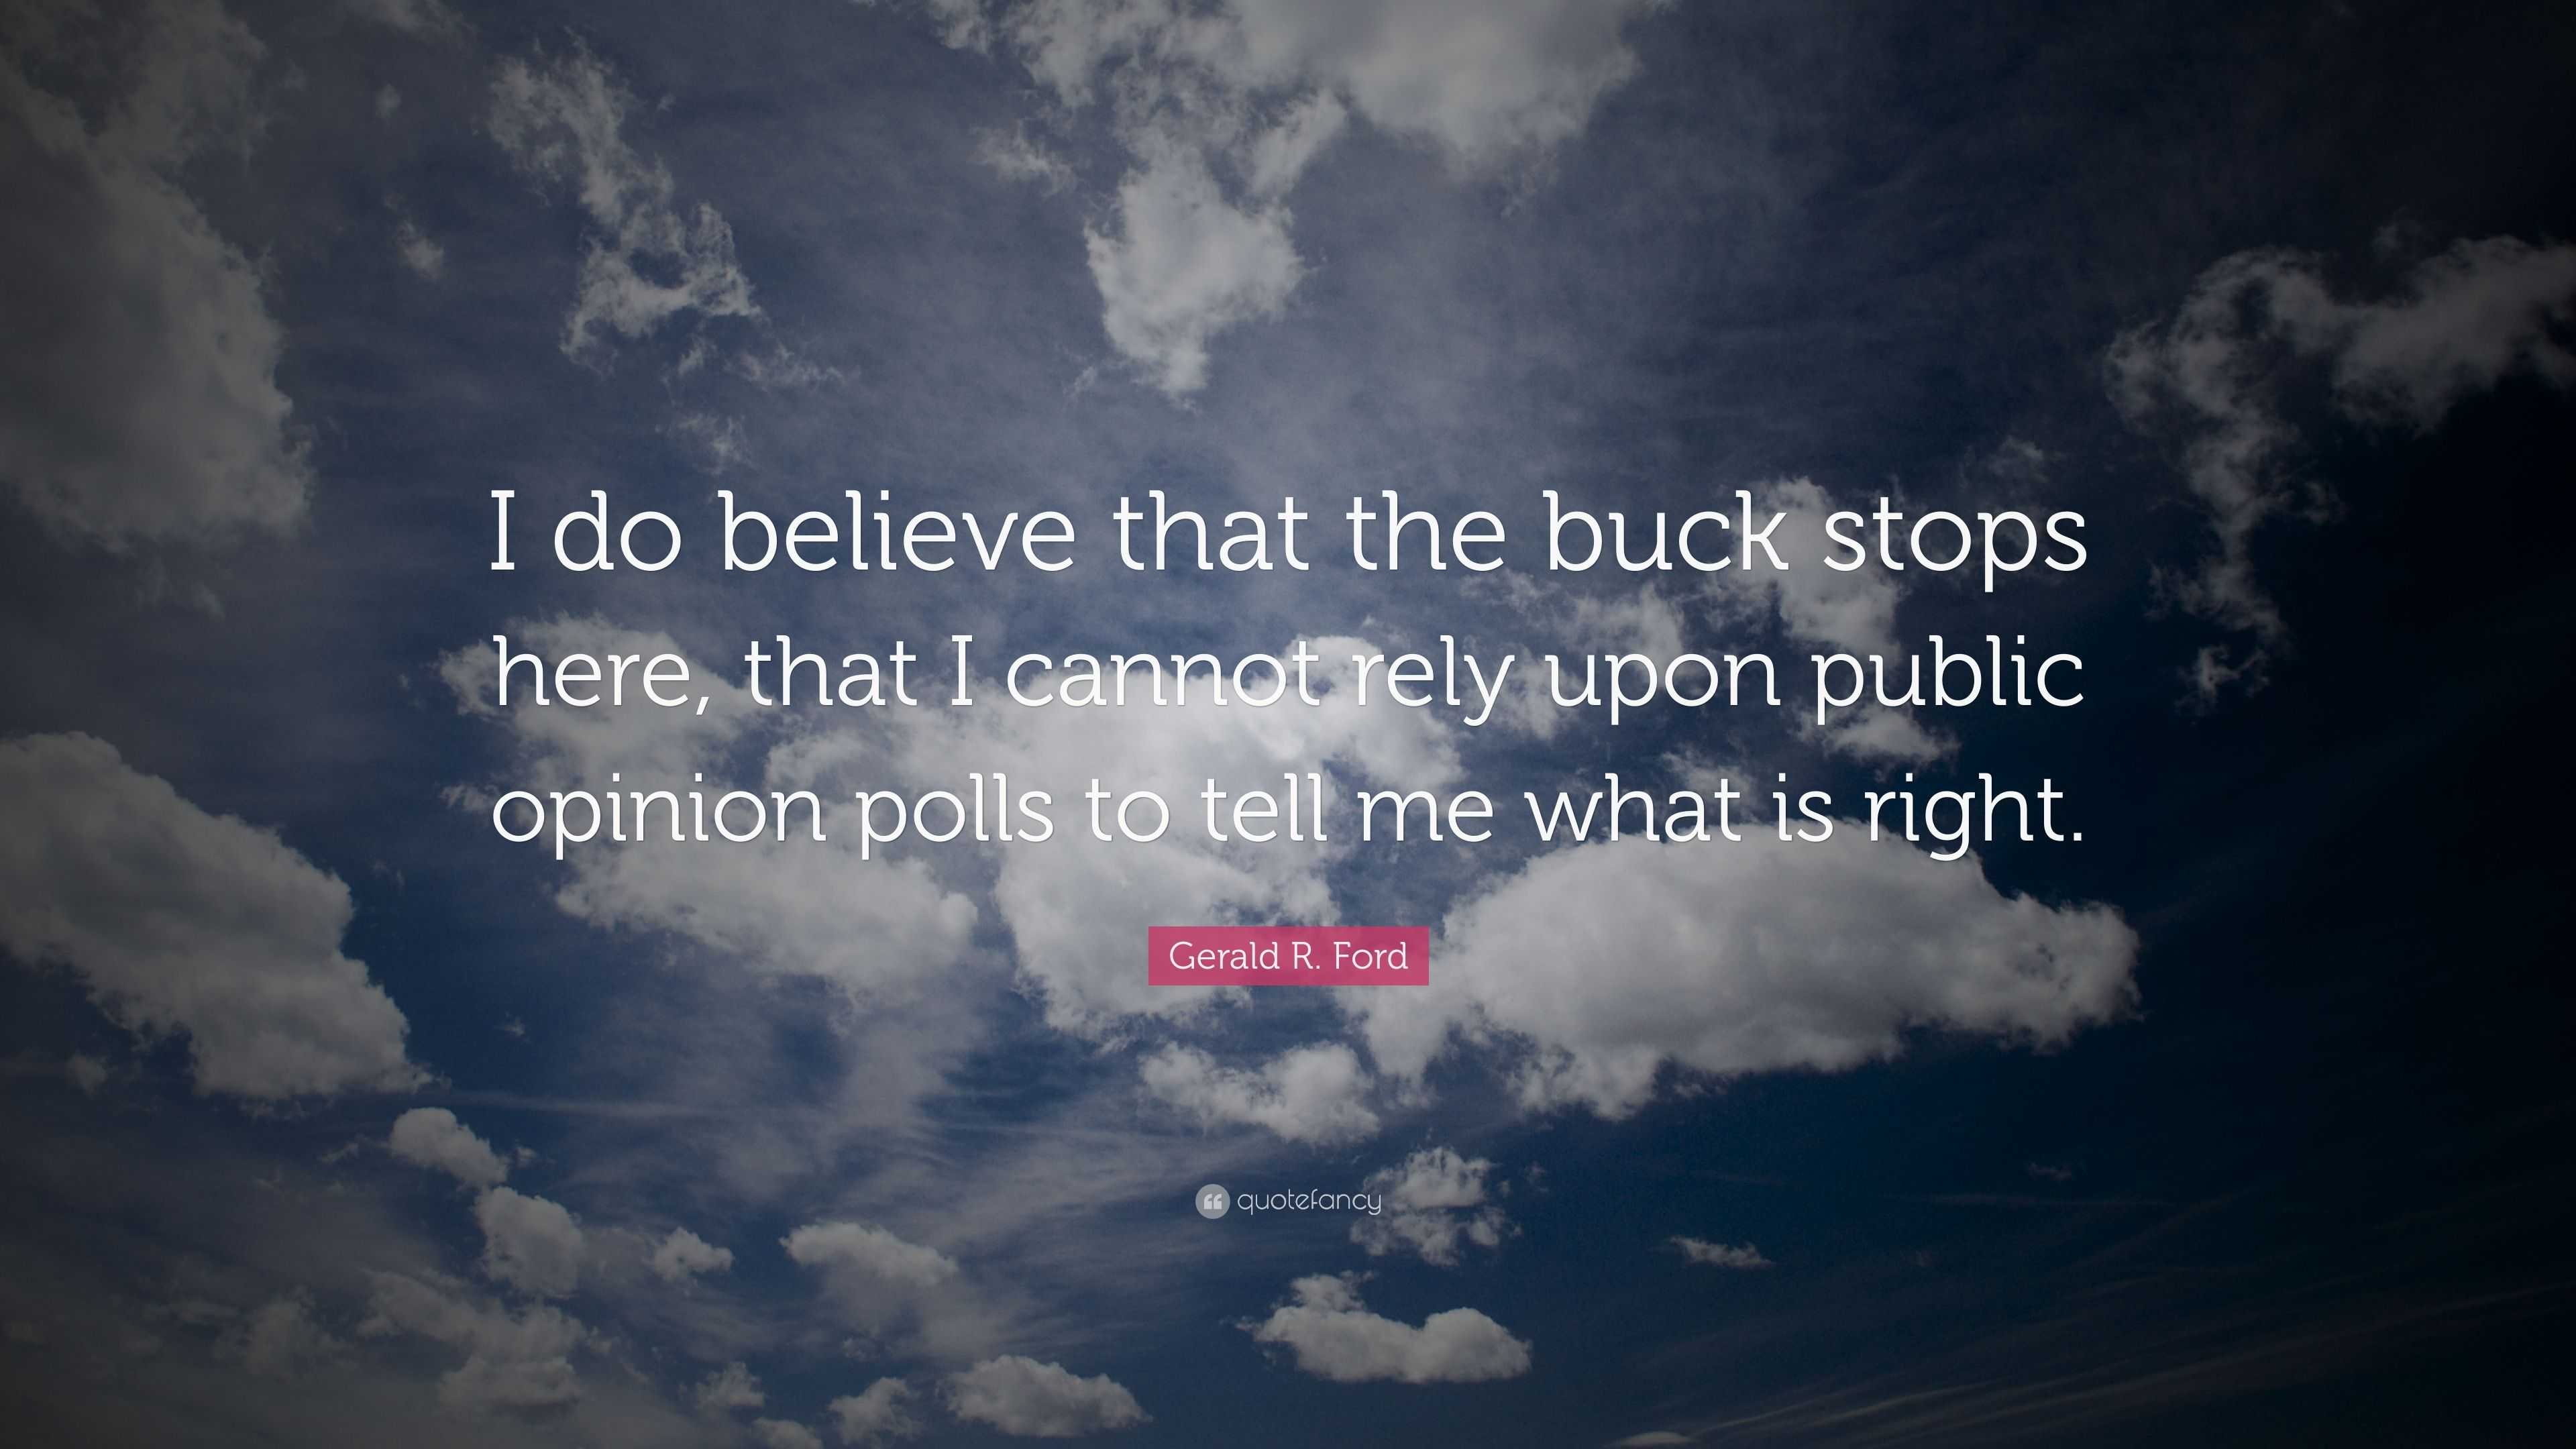 5059271-Gerald-R-Ford-Quote-I-do-believe-that-the-buck-stops-here-that-I.jpg